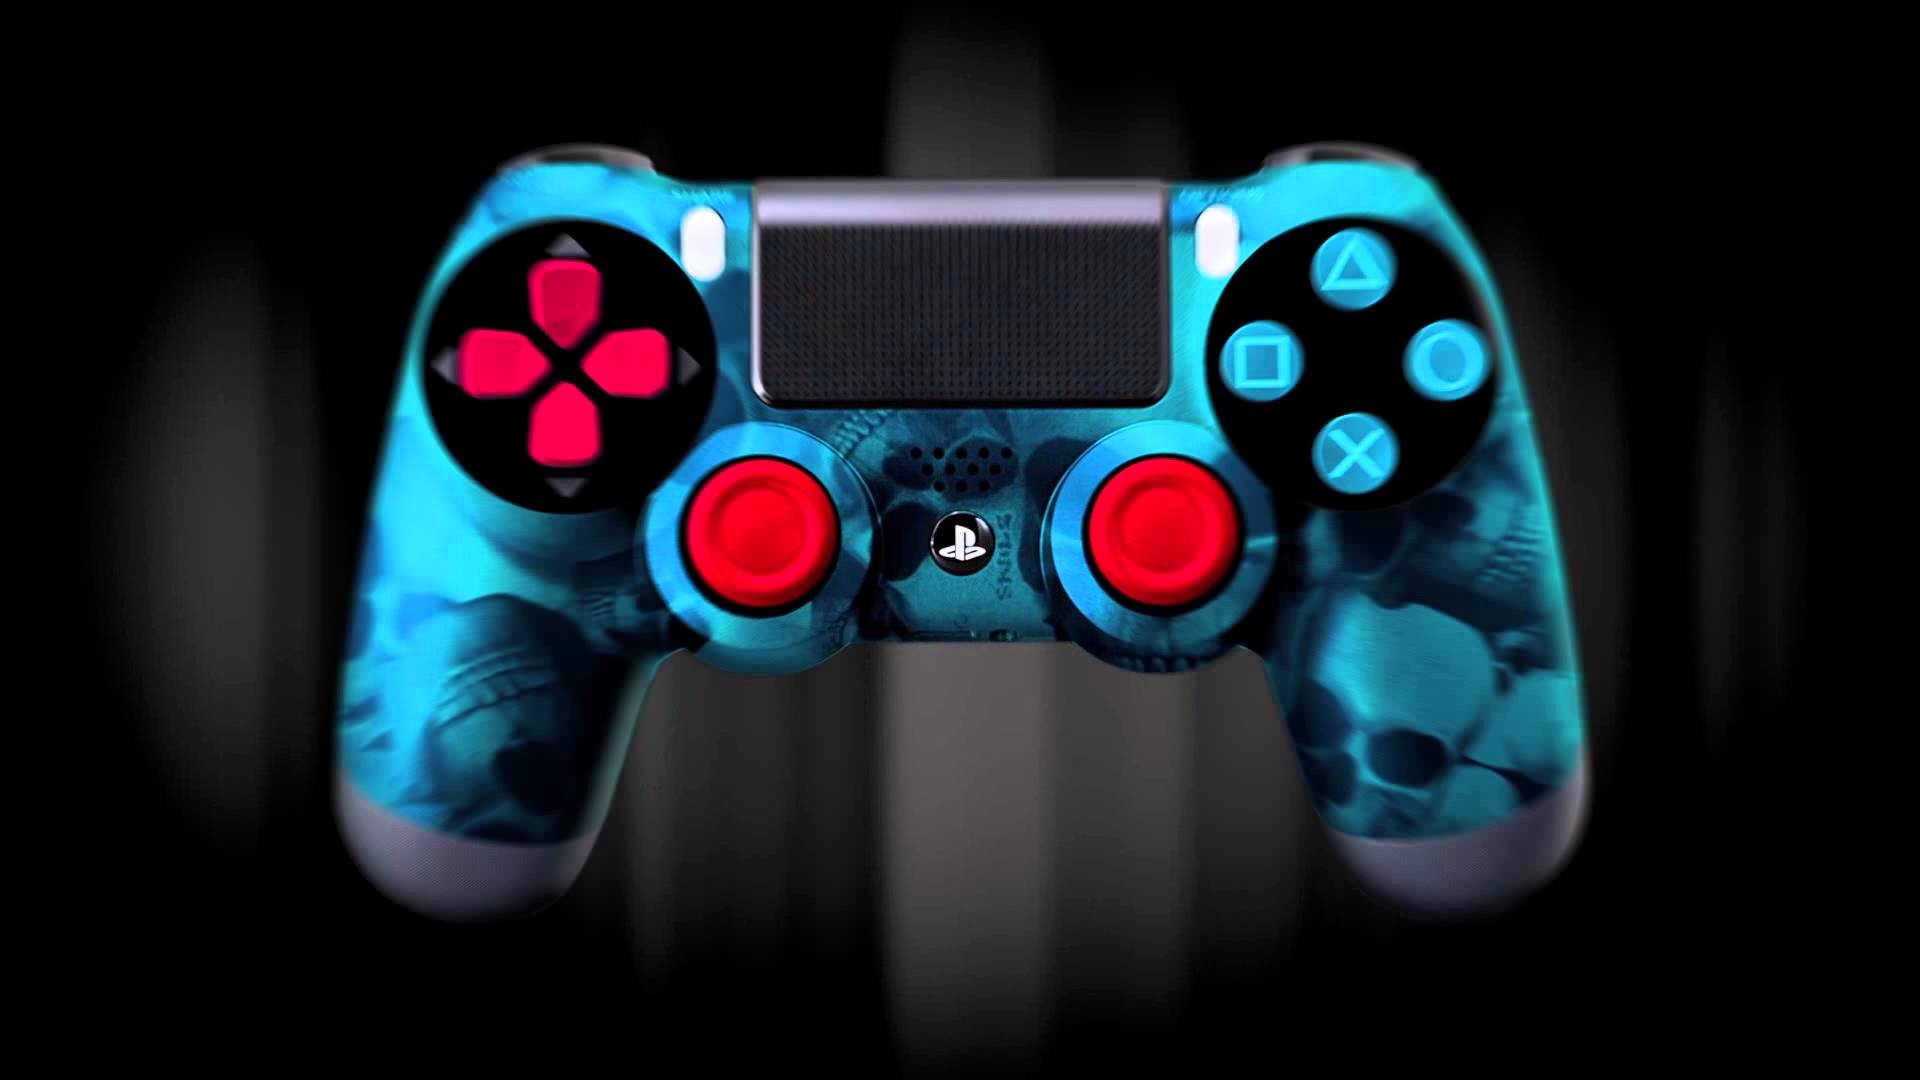 cool ps4 wallpapers,game controller,home game console accessory,joystick,video game accessory,playstation accessory